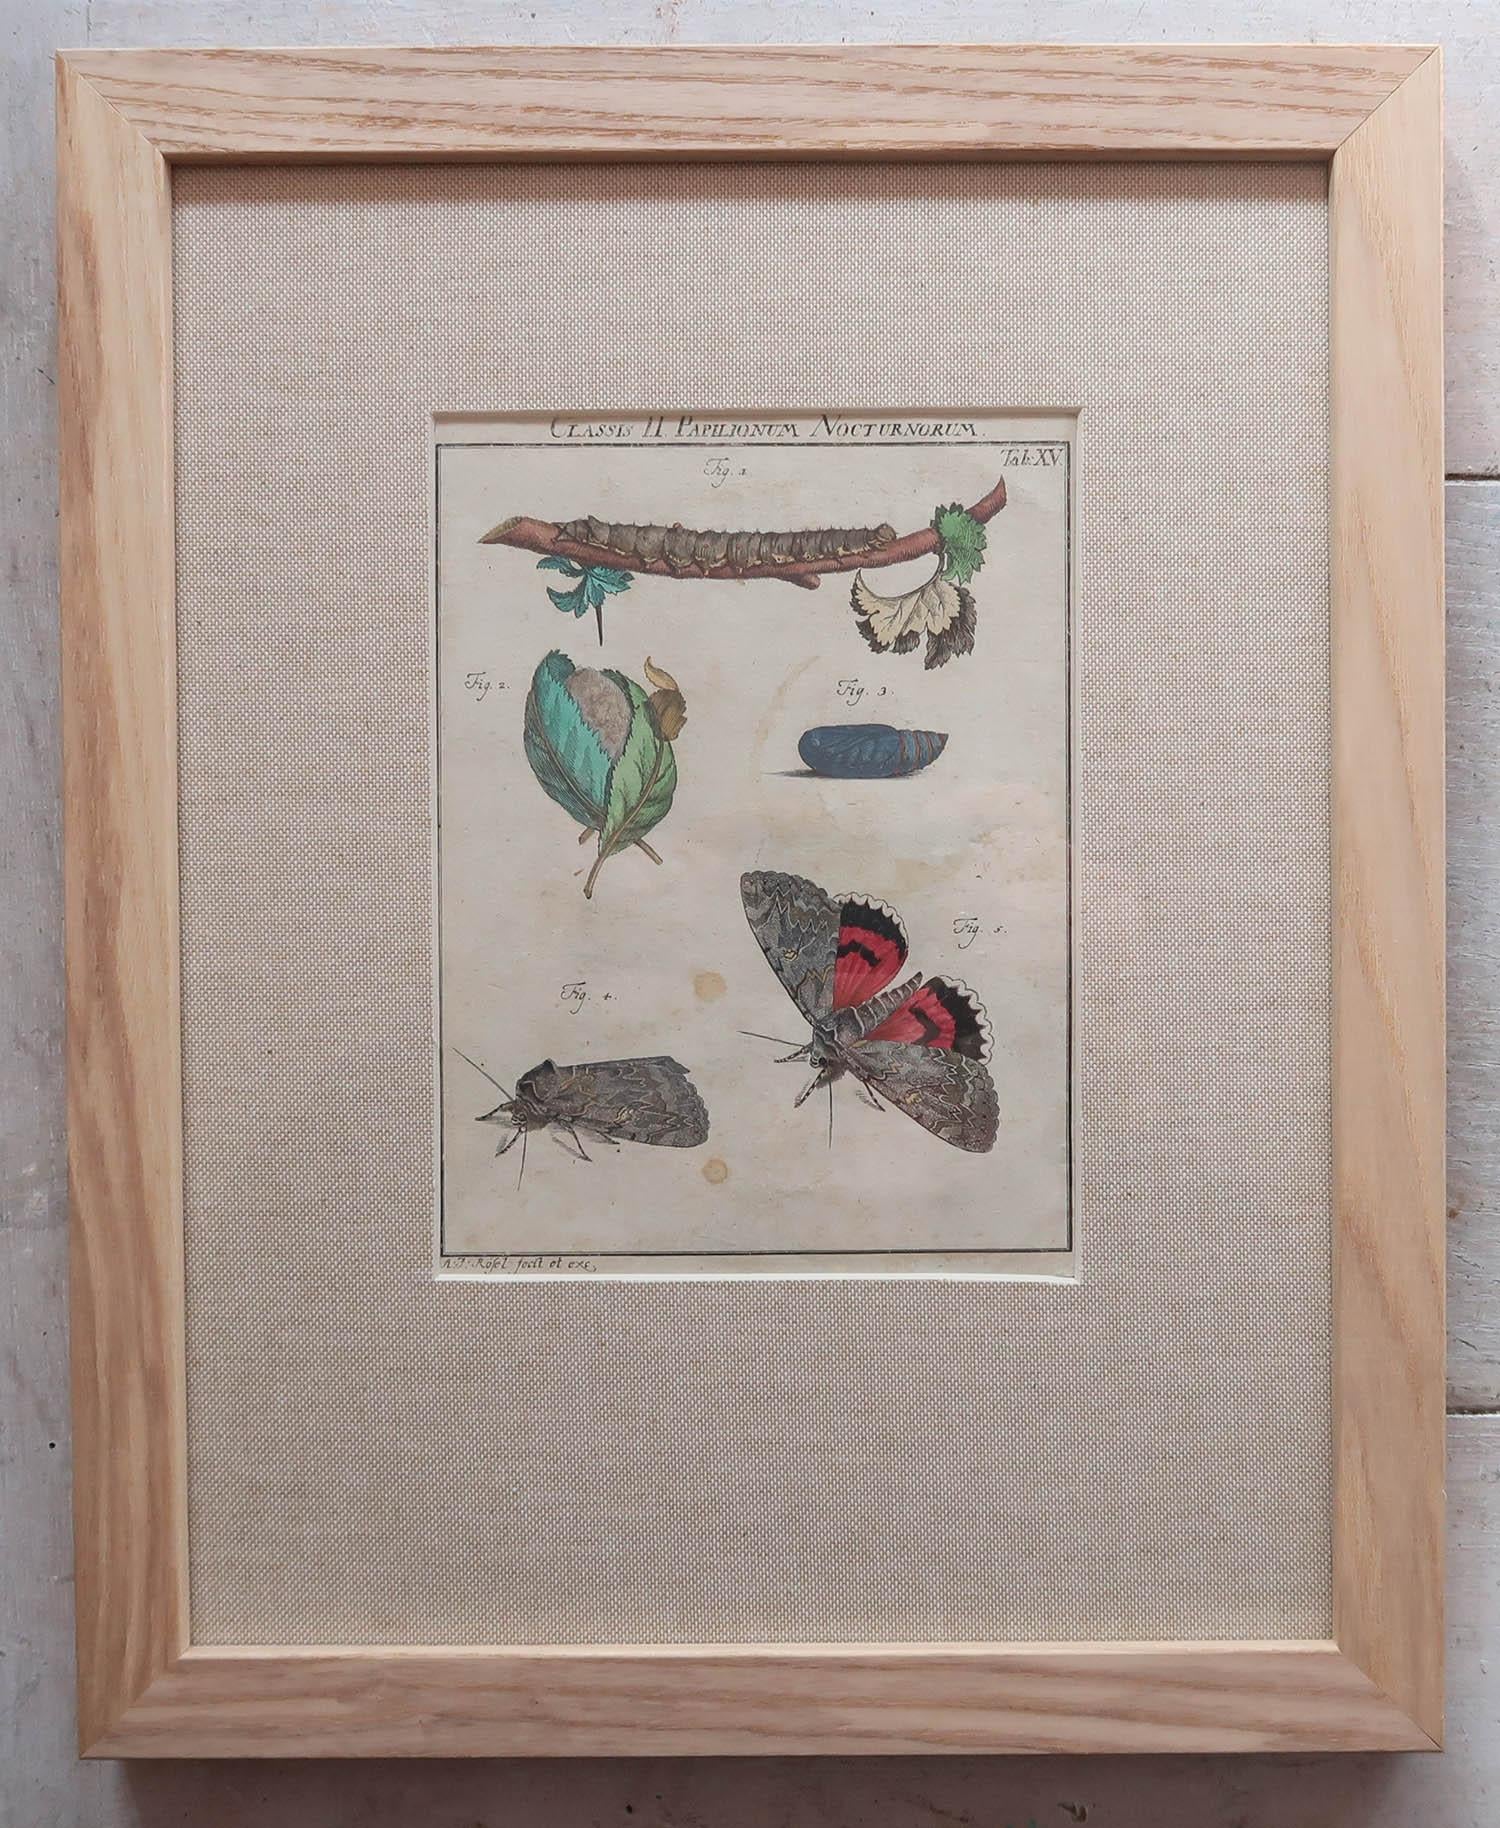 Wonderful set of antique butterfly prints in lovely muted colors.

Copper-plate engravings with original hand colour

After A.J Rosel Von Rosenhof

Published circa 1740

Presented in our own custom made ash frames with burlap mounts or